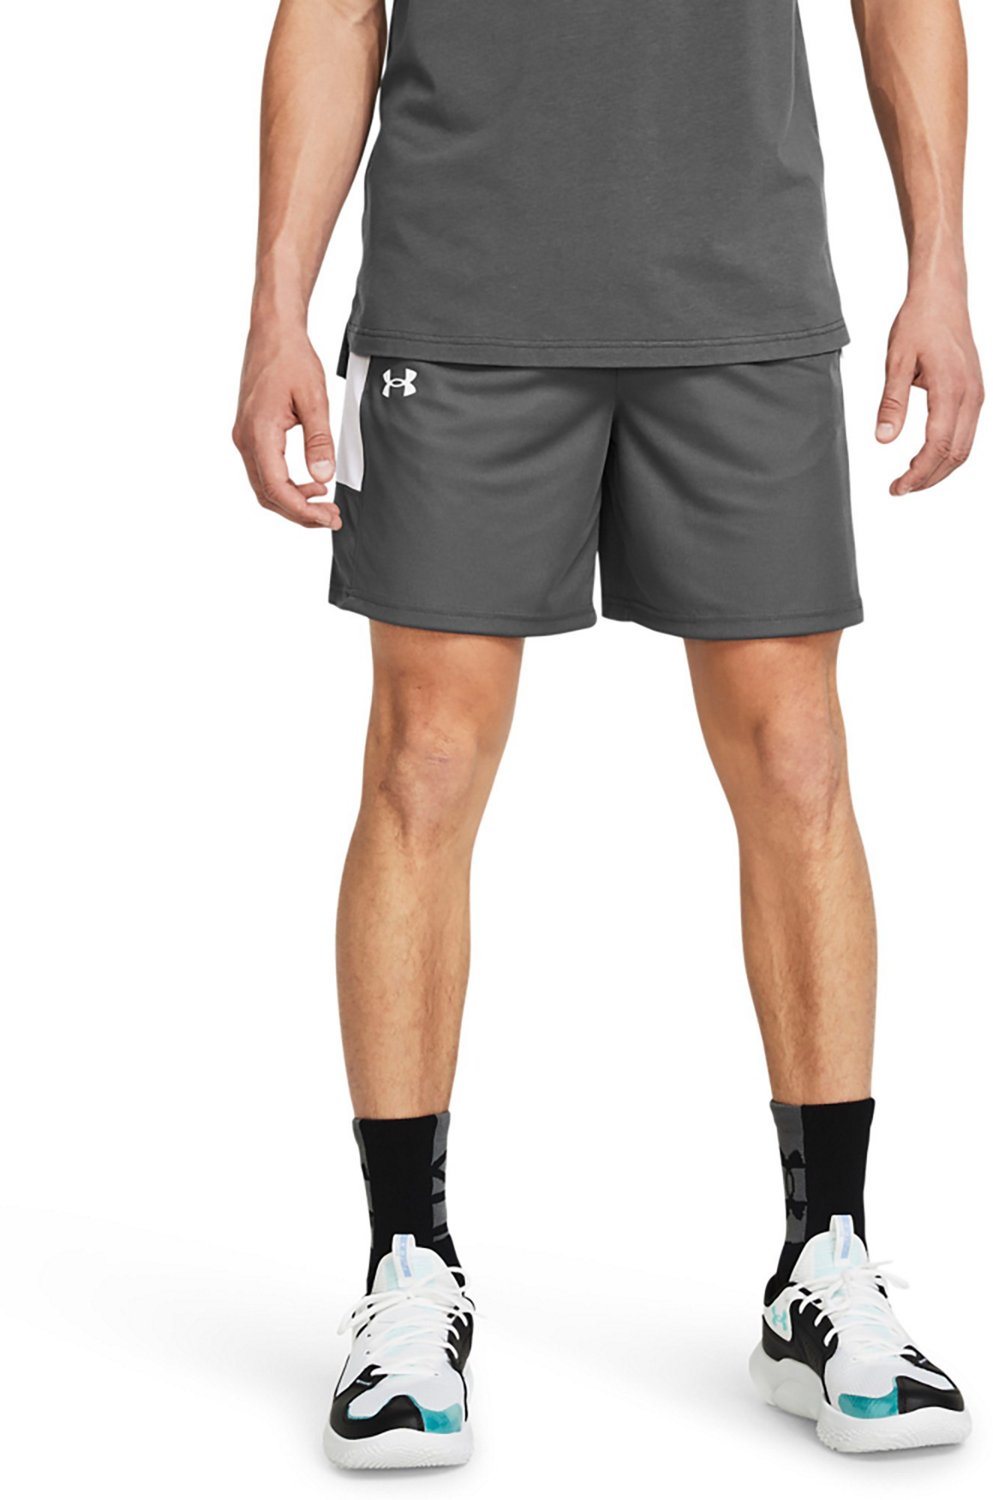 Under Armour Mens Baseline Zone Basketball Shorts 7 in